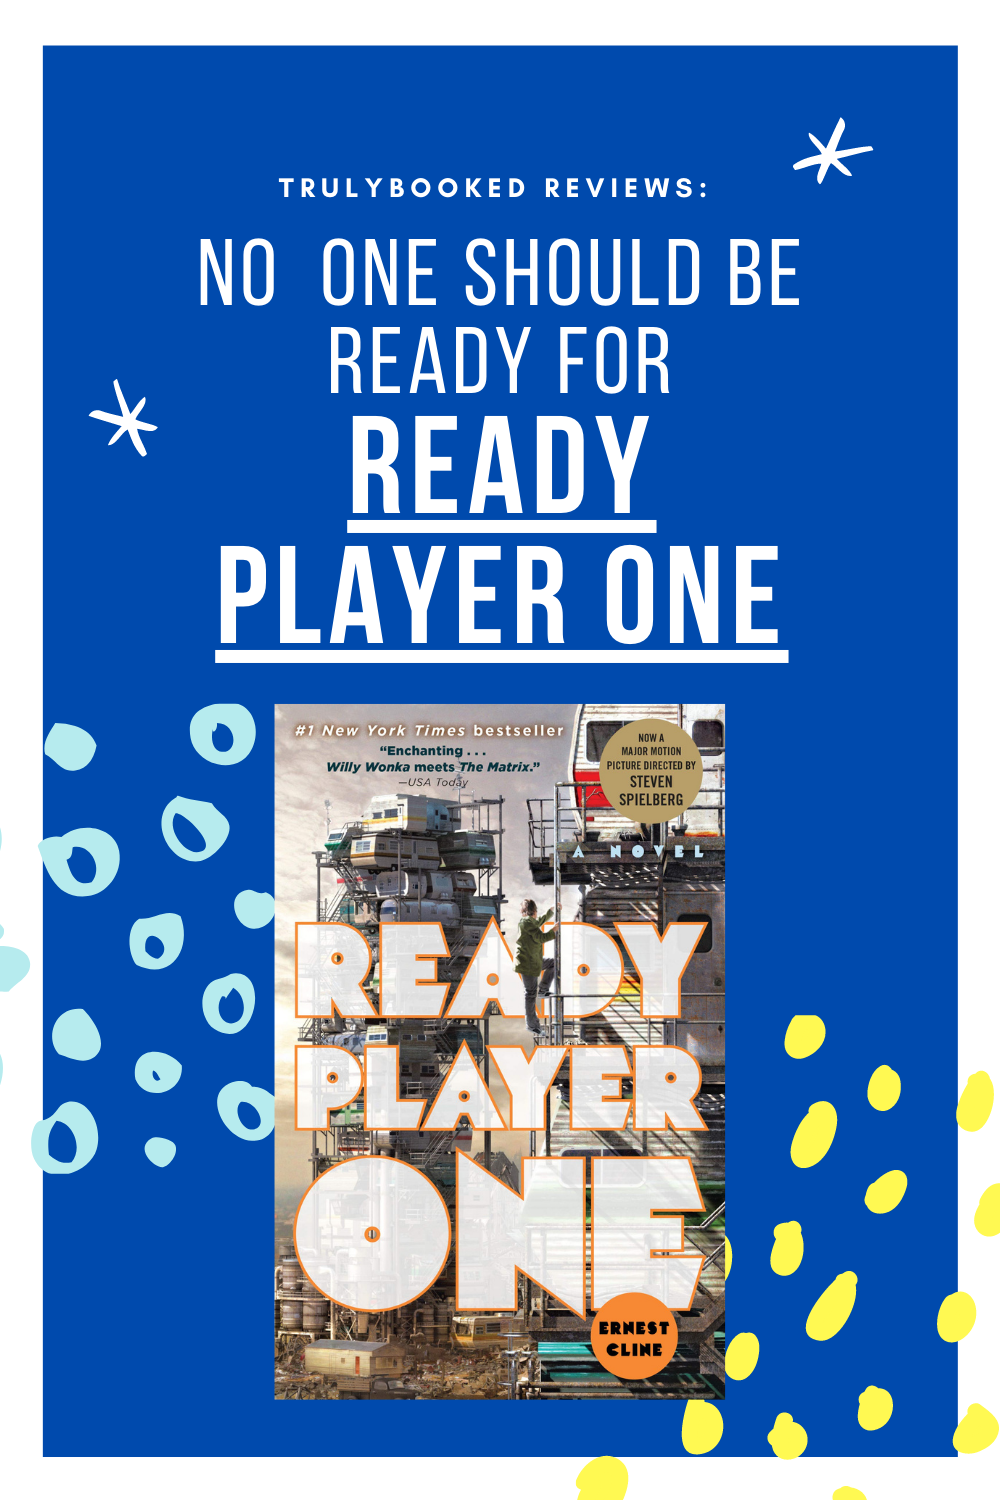 No One should be ready for ready player one